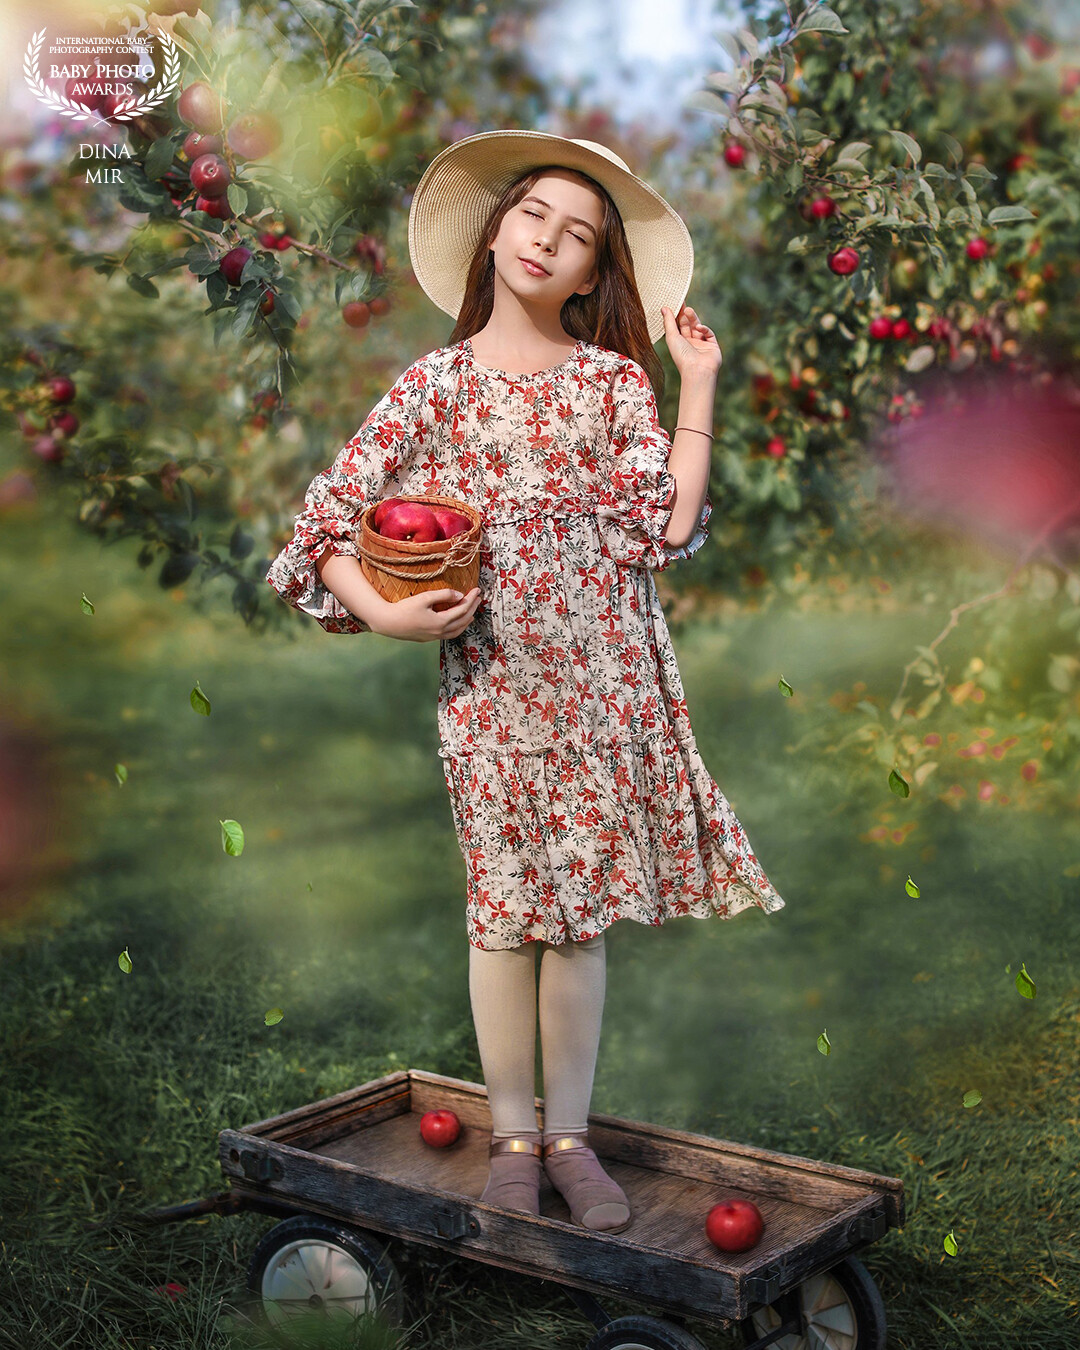 I love the smell of apples. And I love the taste of them. I will collect a basket and treat my friends again